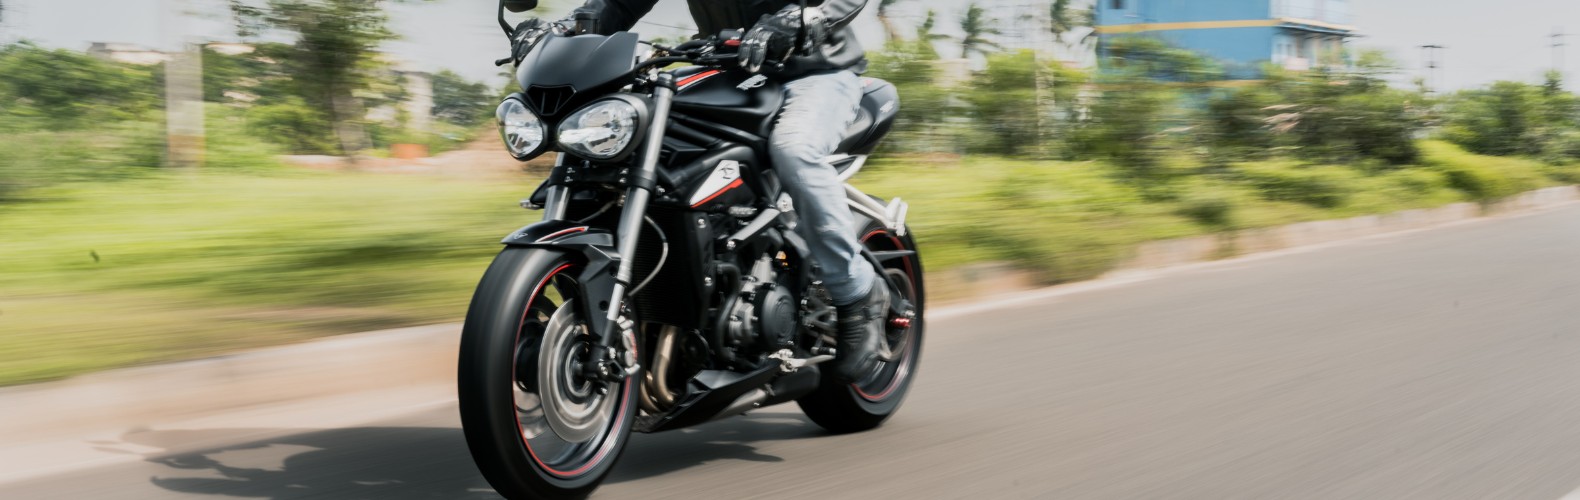 How to Save Money While Insuring Your Motorcycle